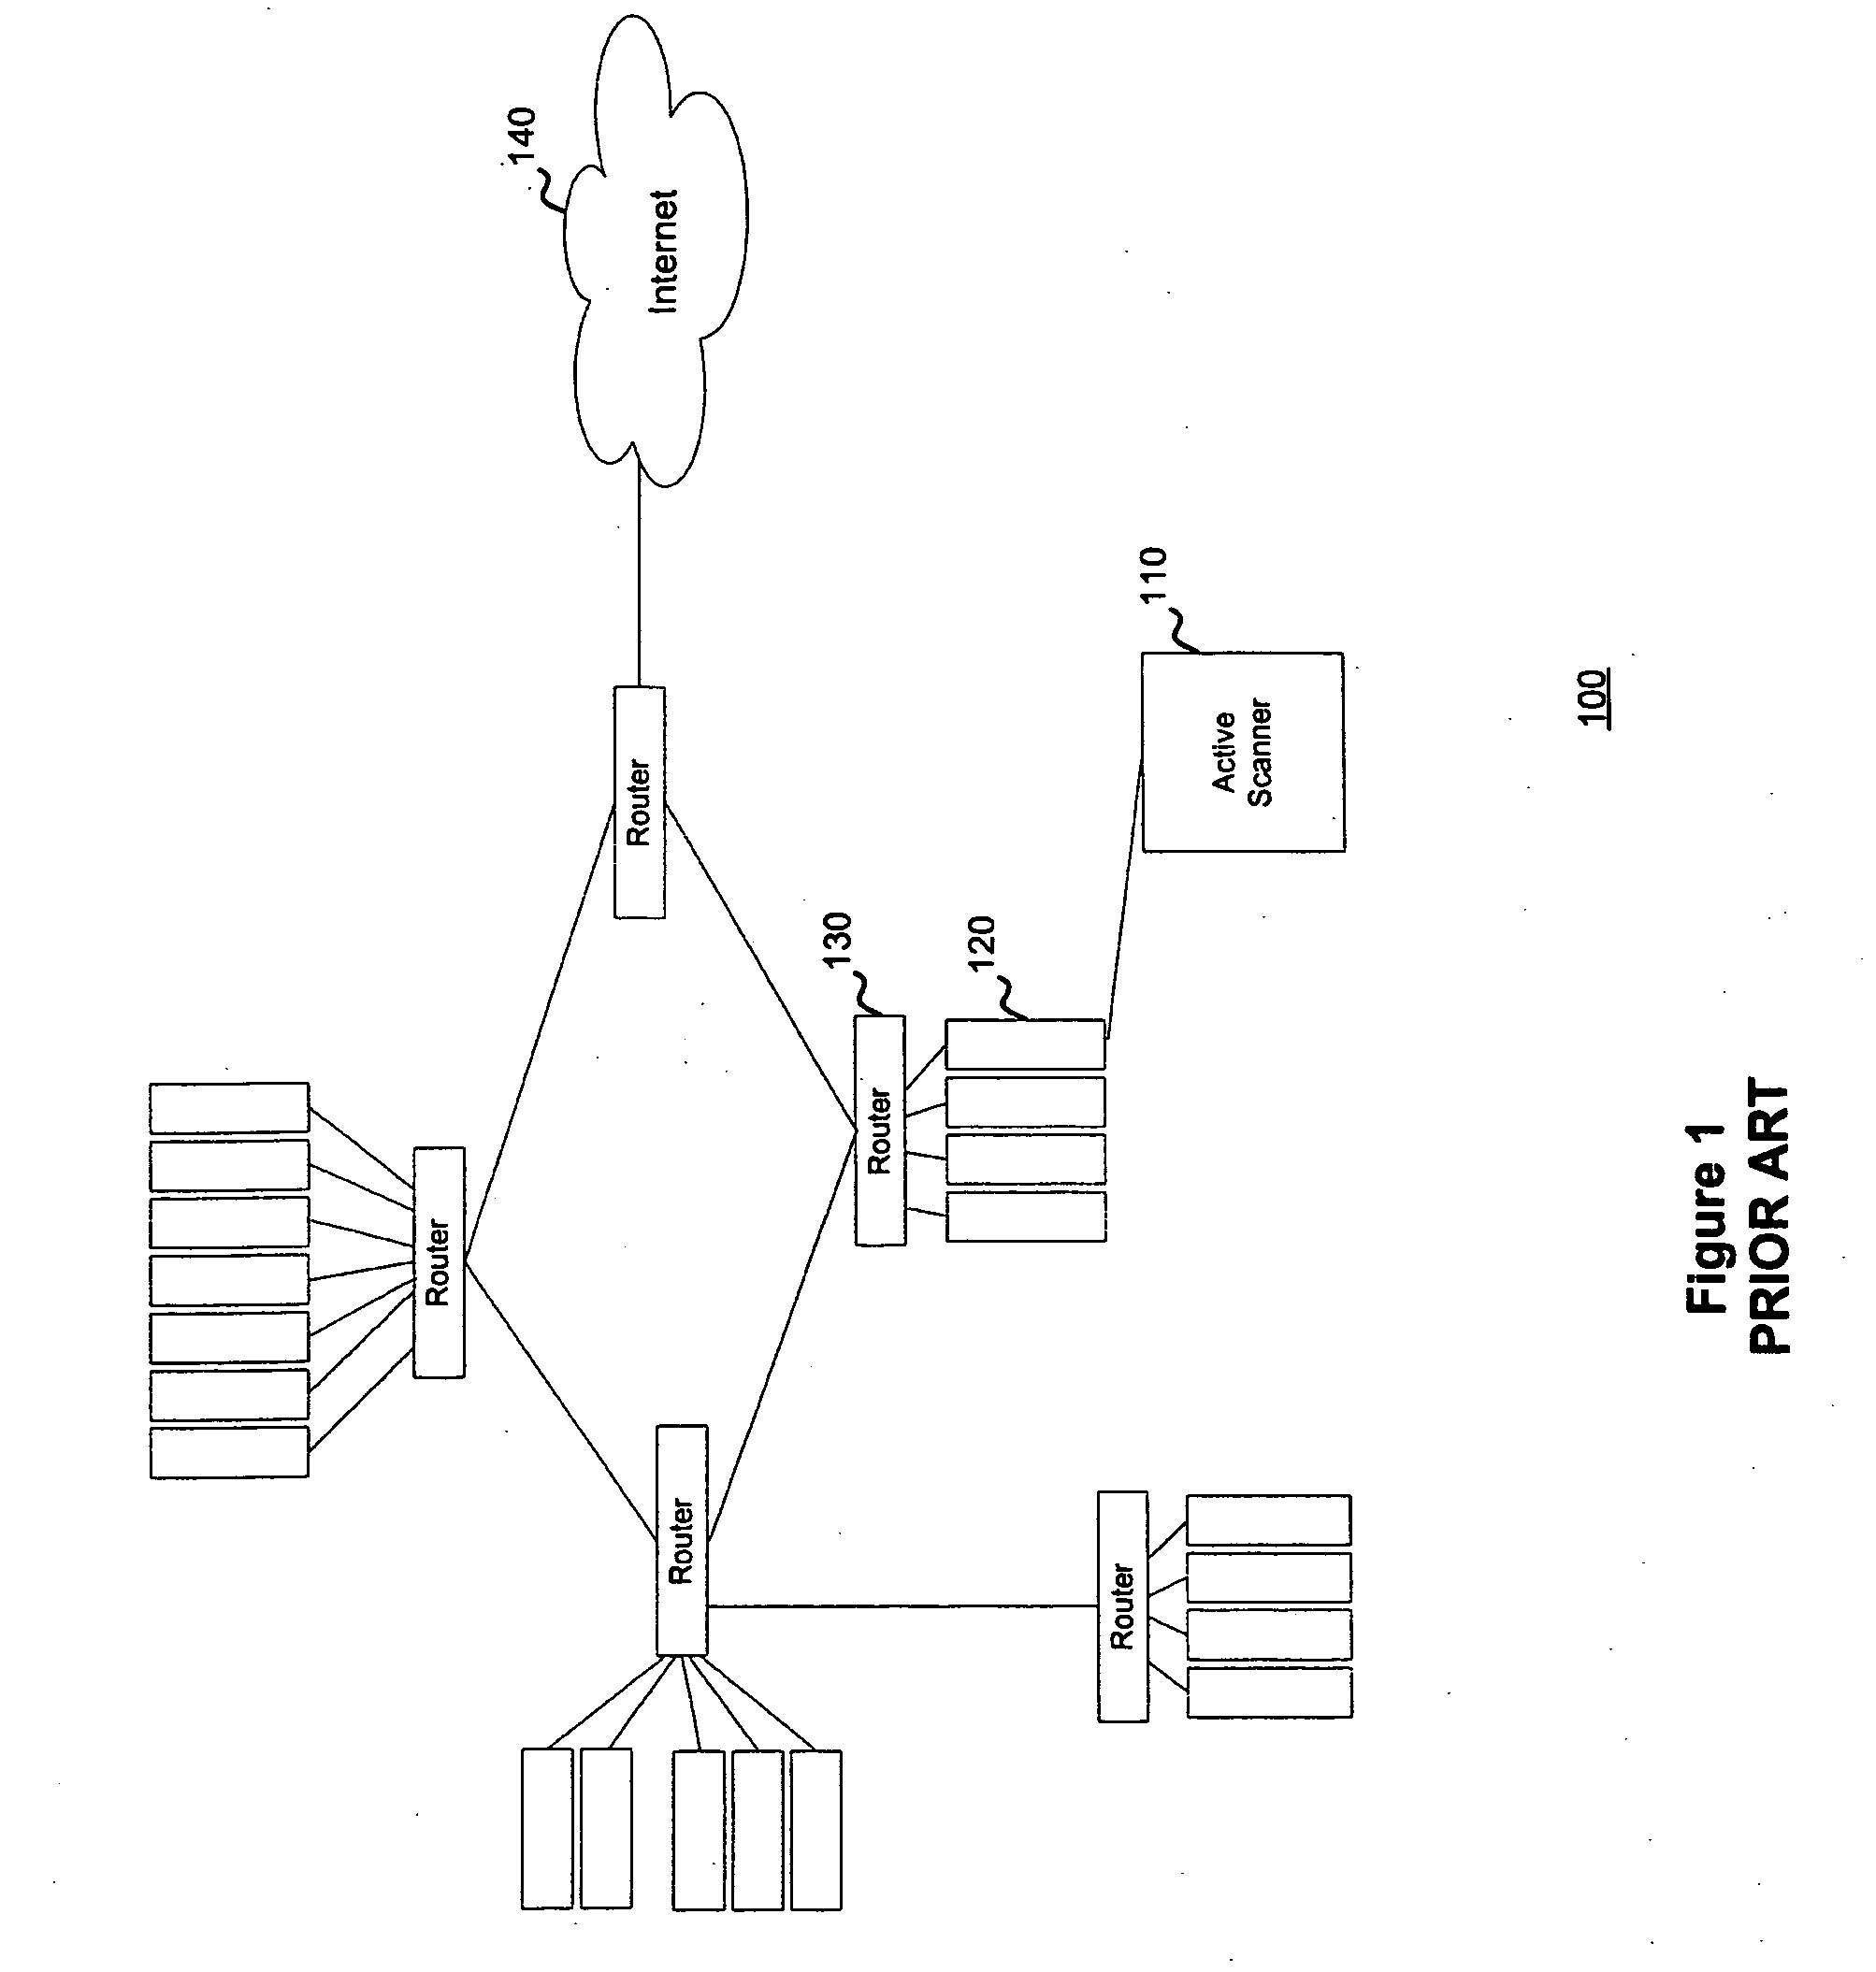 System and method for scanning a network